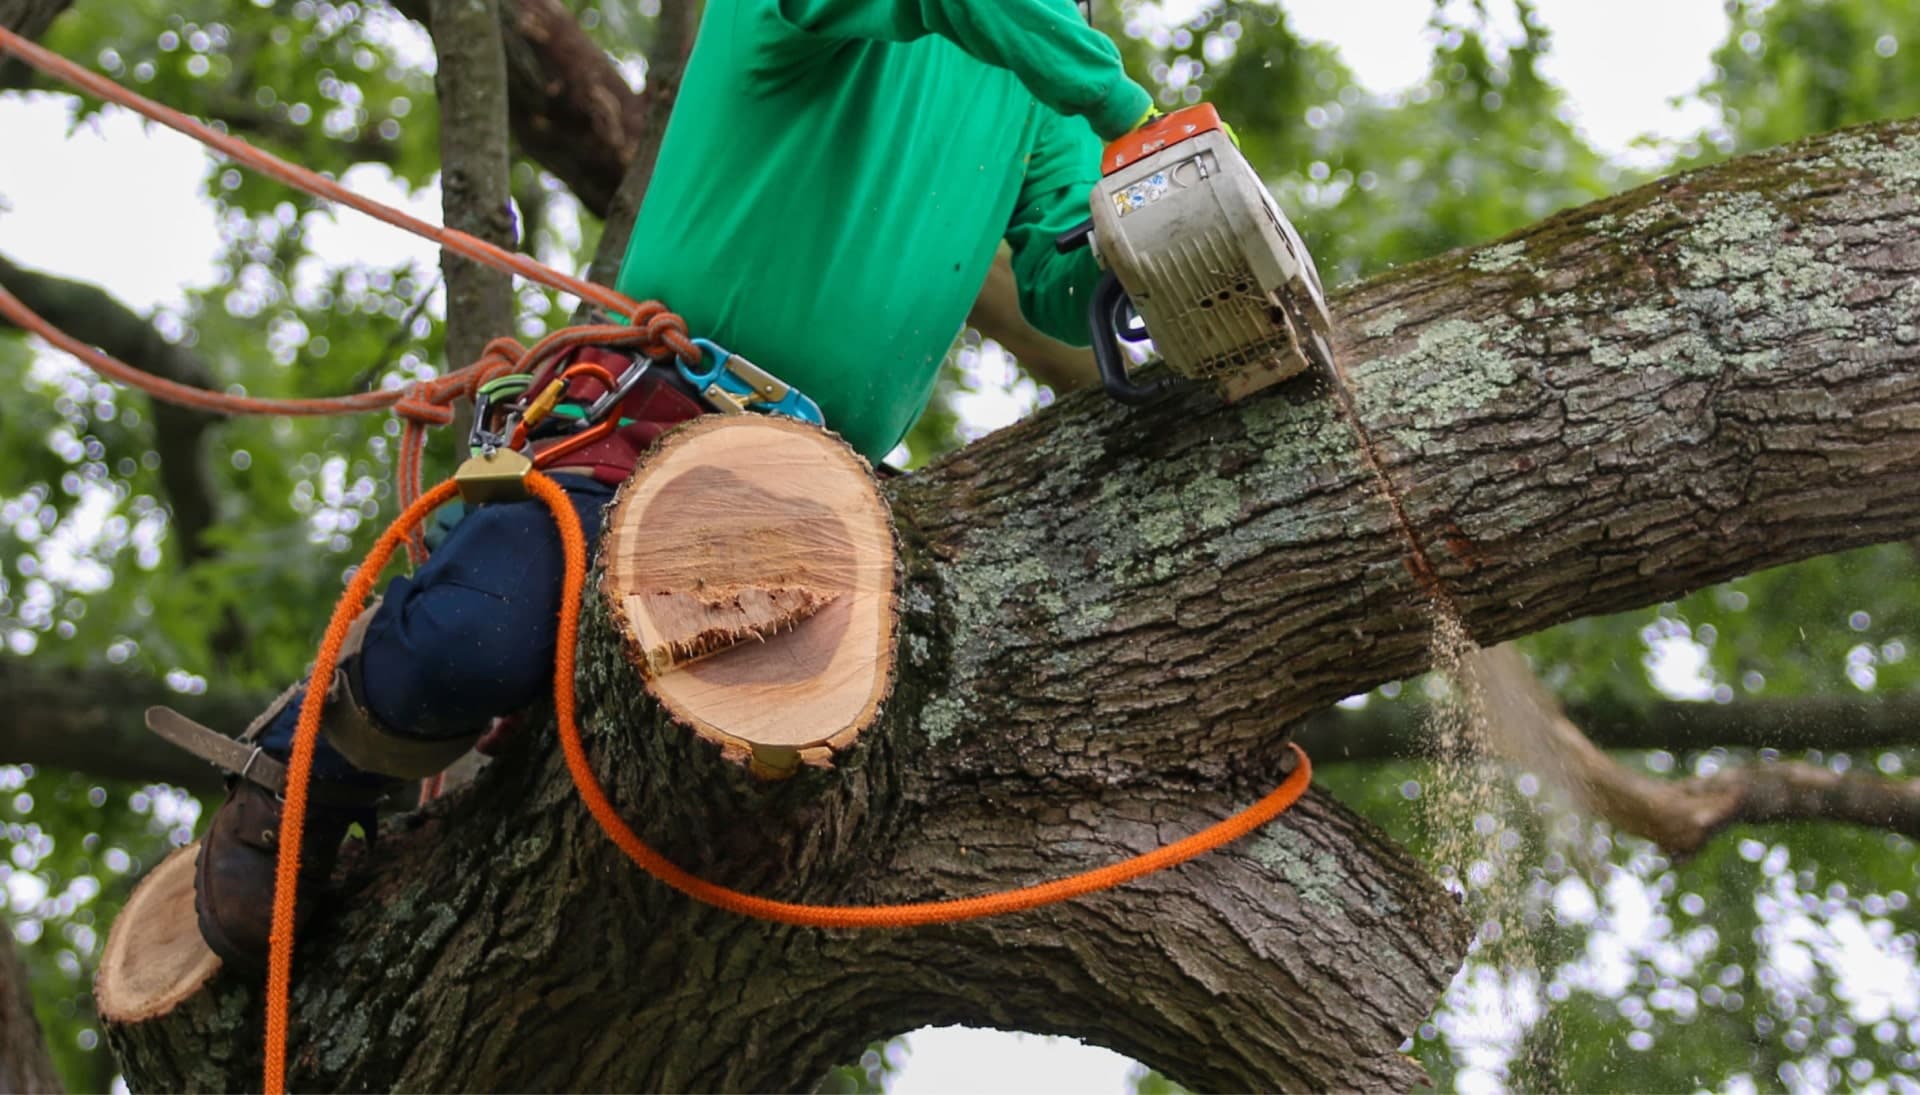 Shed your worries away with best tree removal in Greensboro